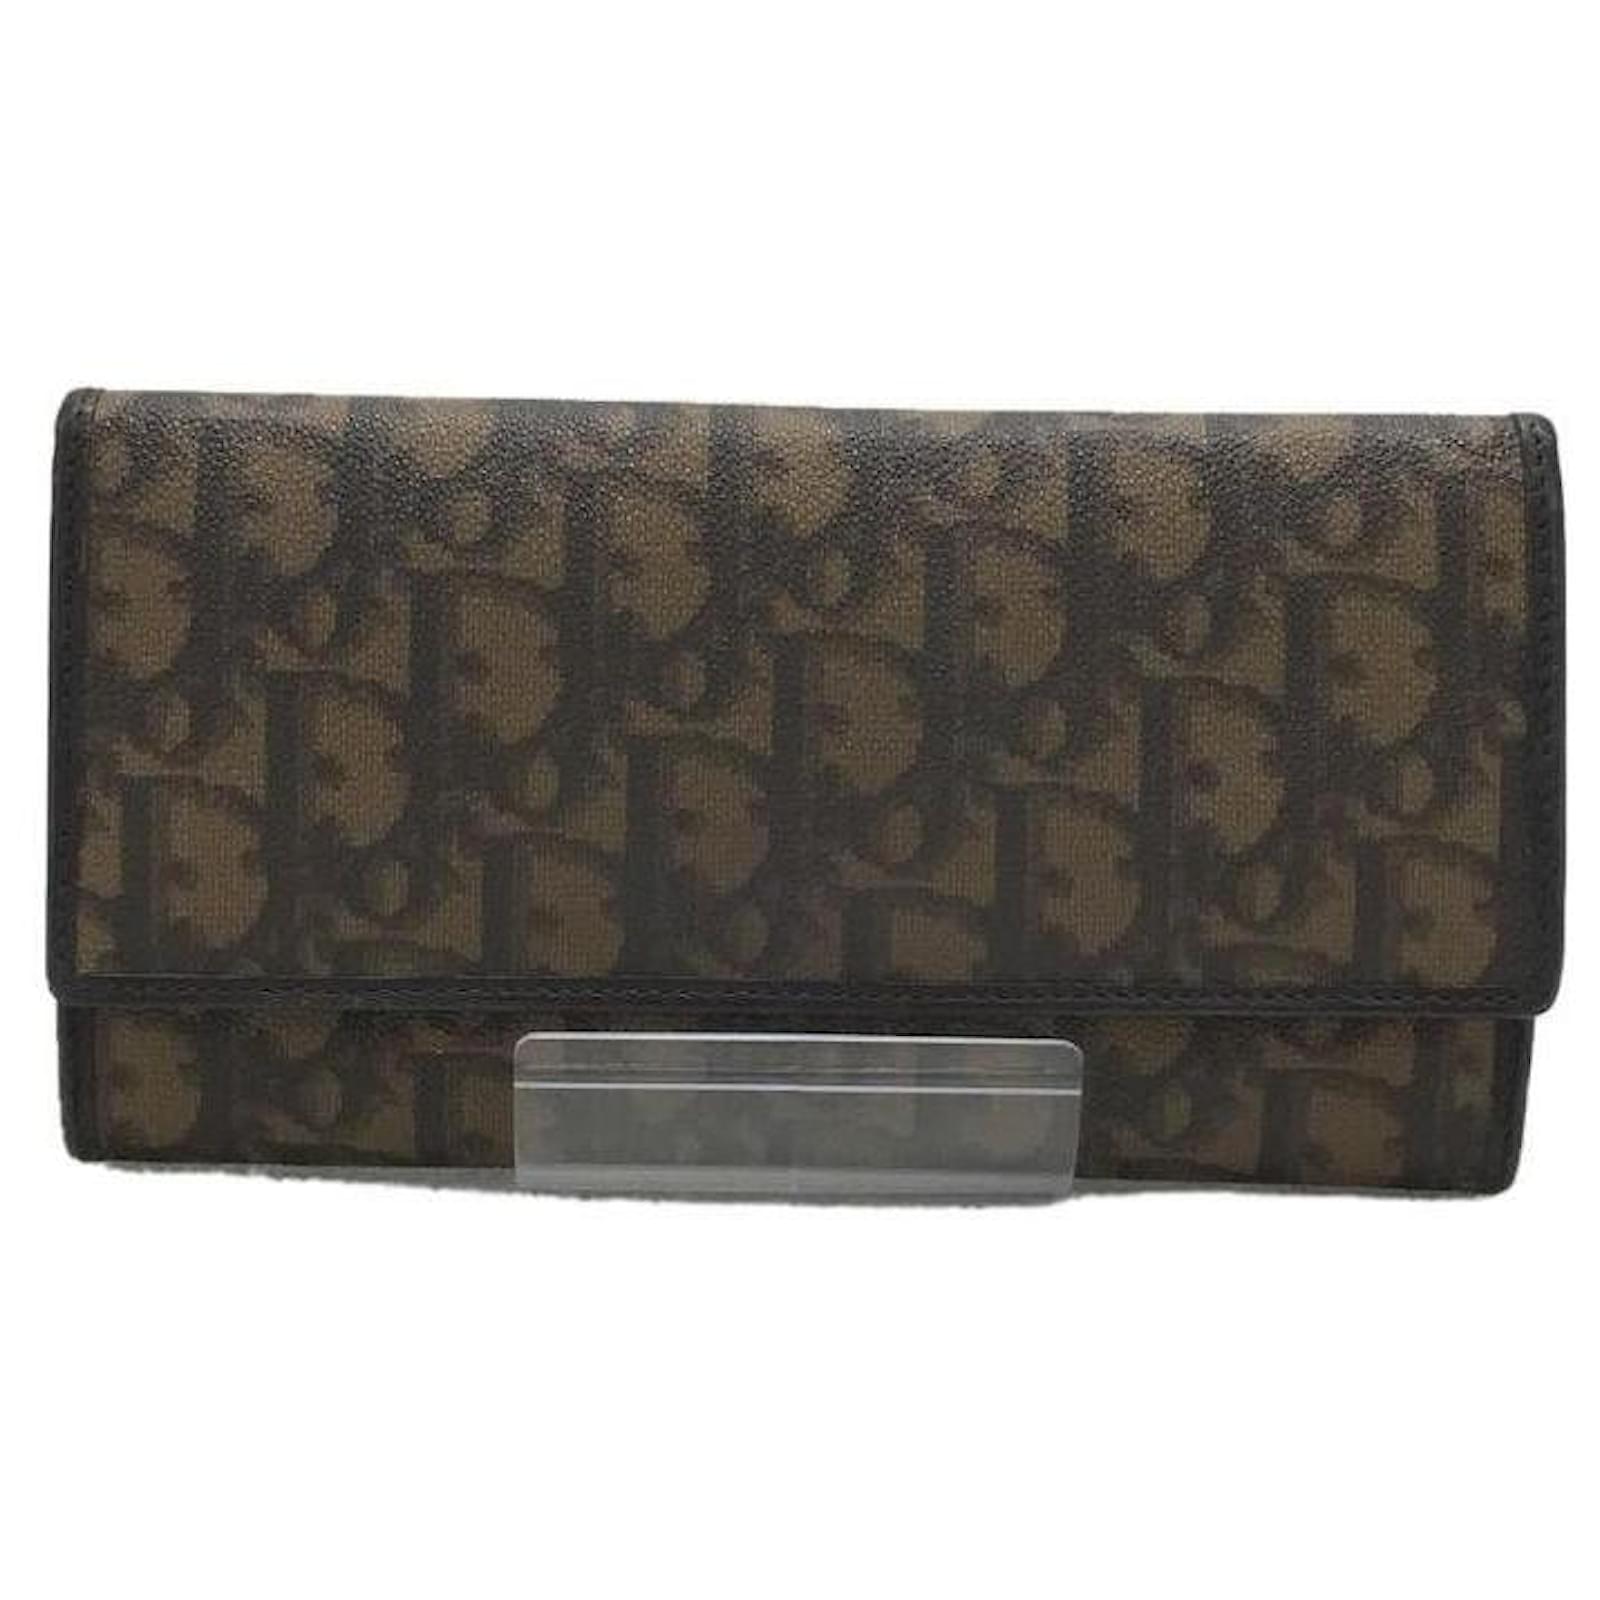 Christian Dior Long wallet / BRW / Total pattern / Unisex / Trotter ...